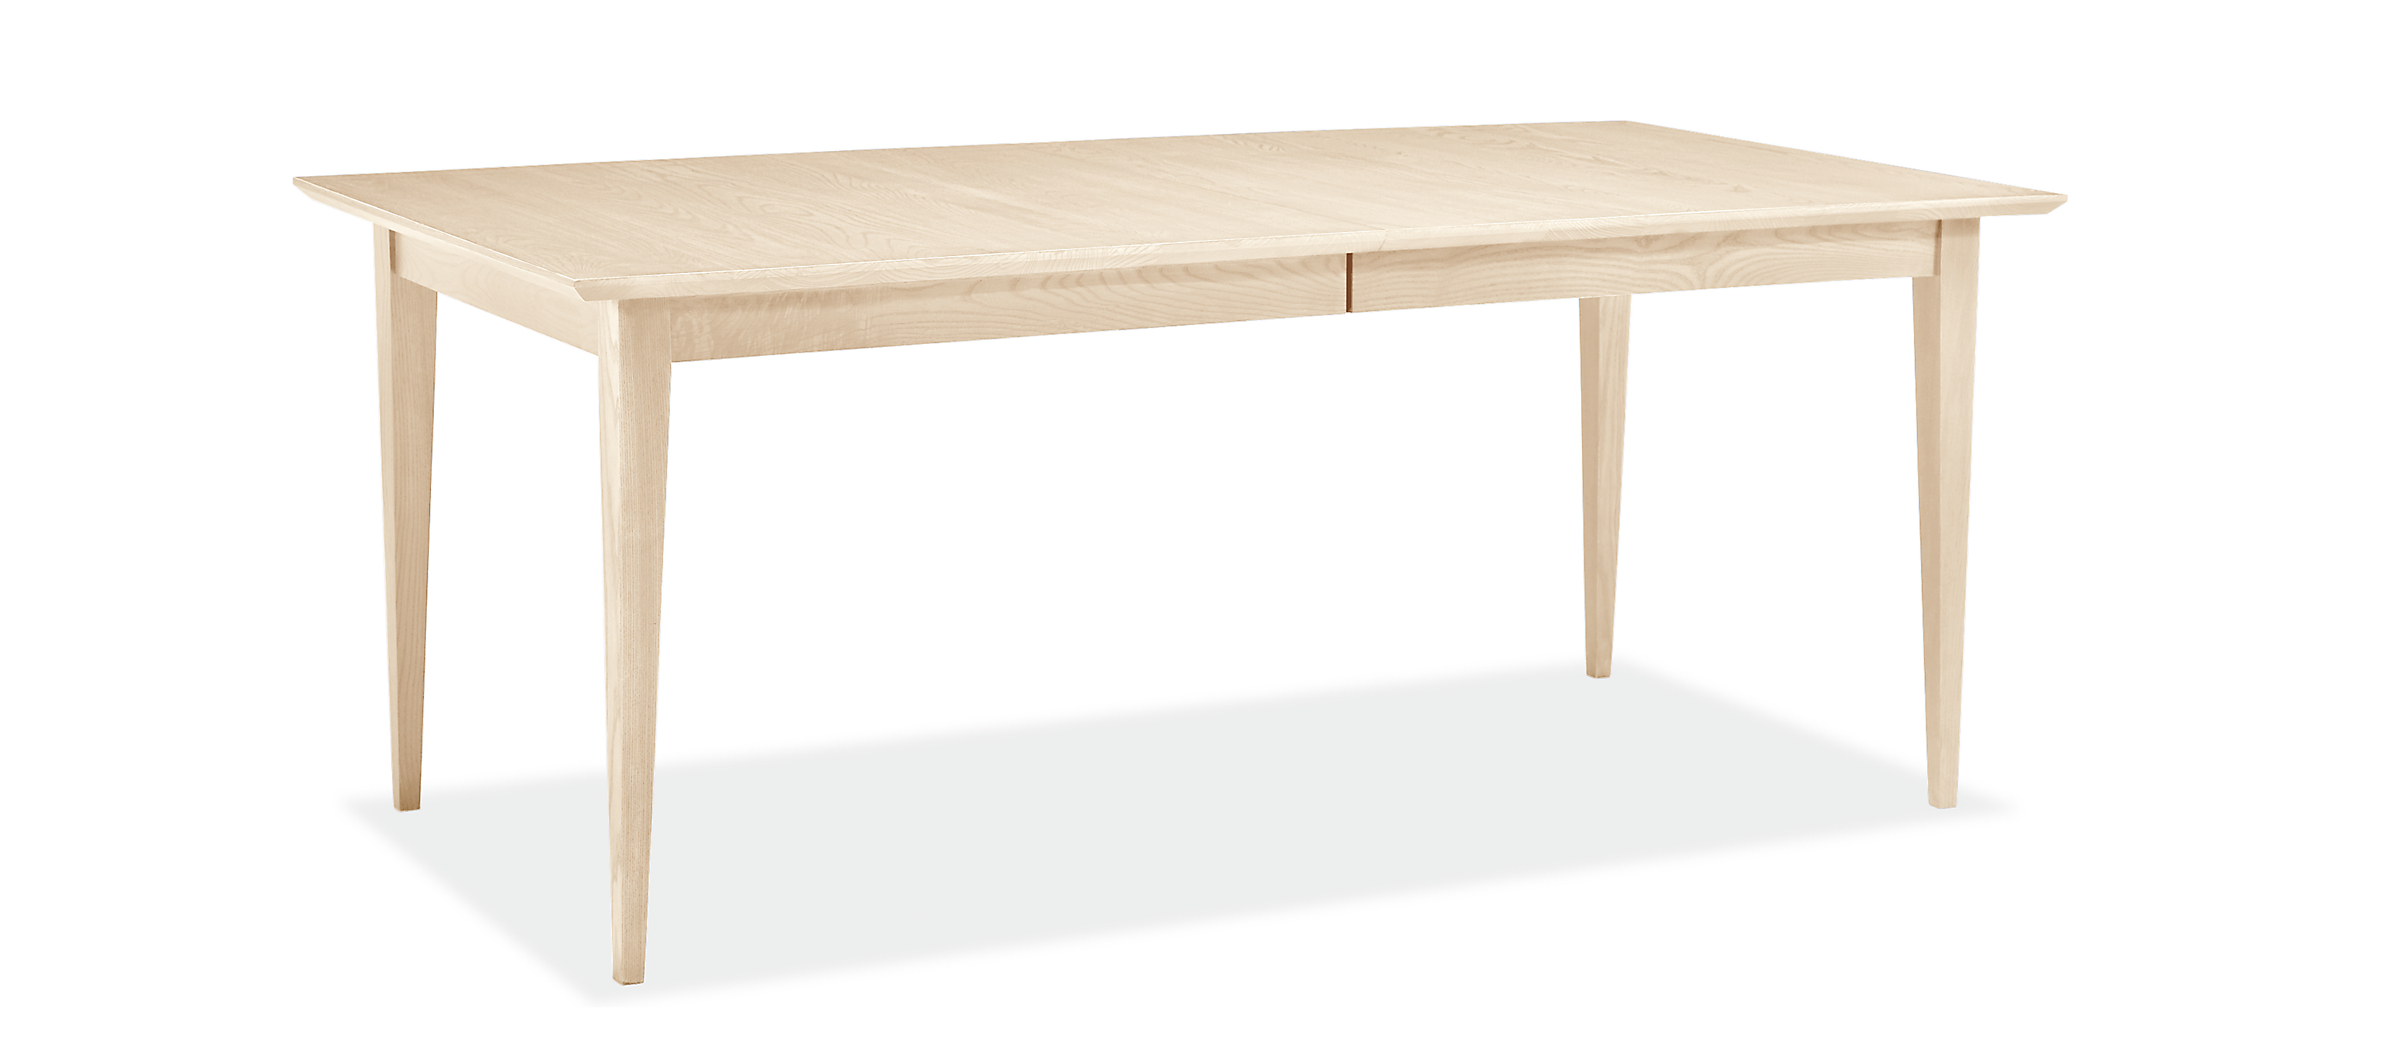 Adams Extension Table by the Inch